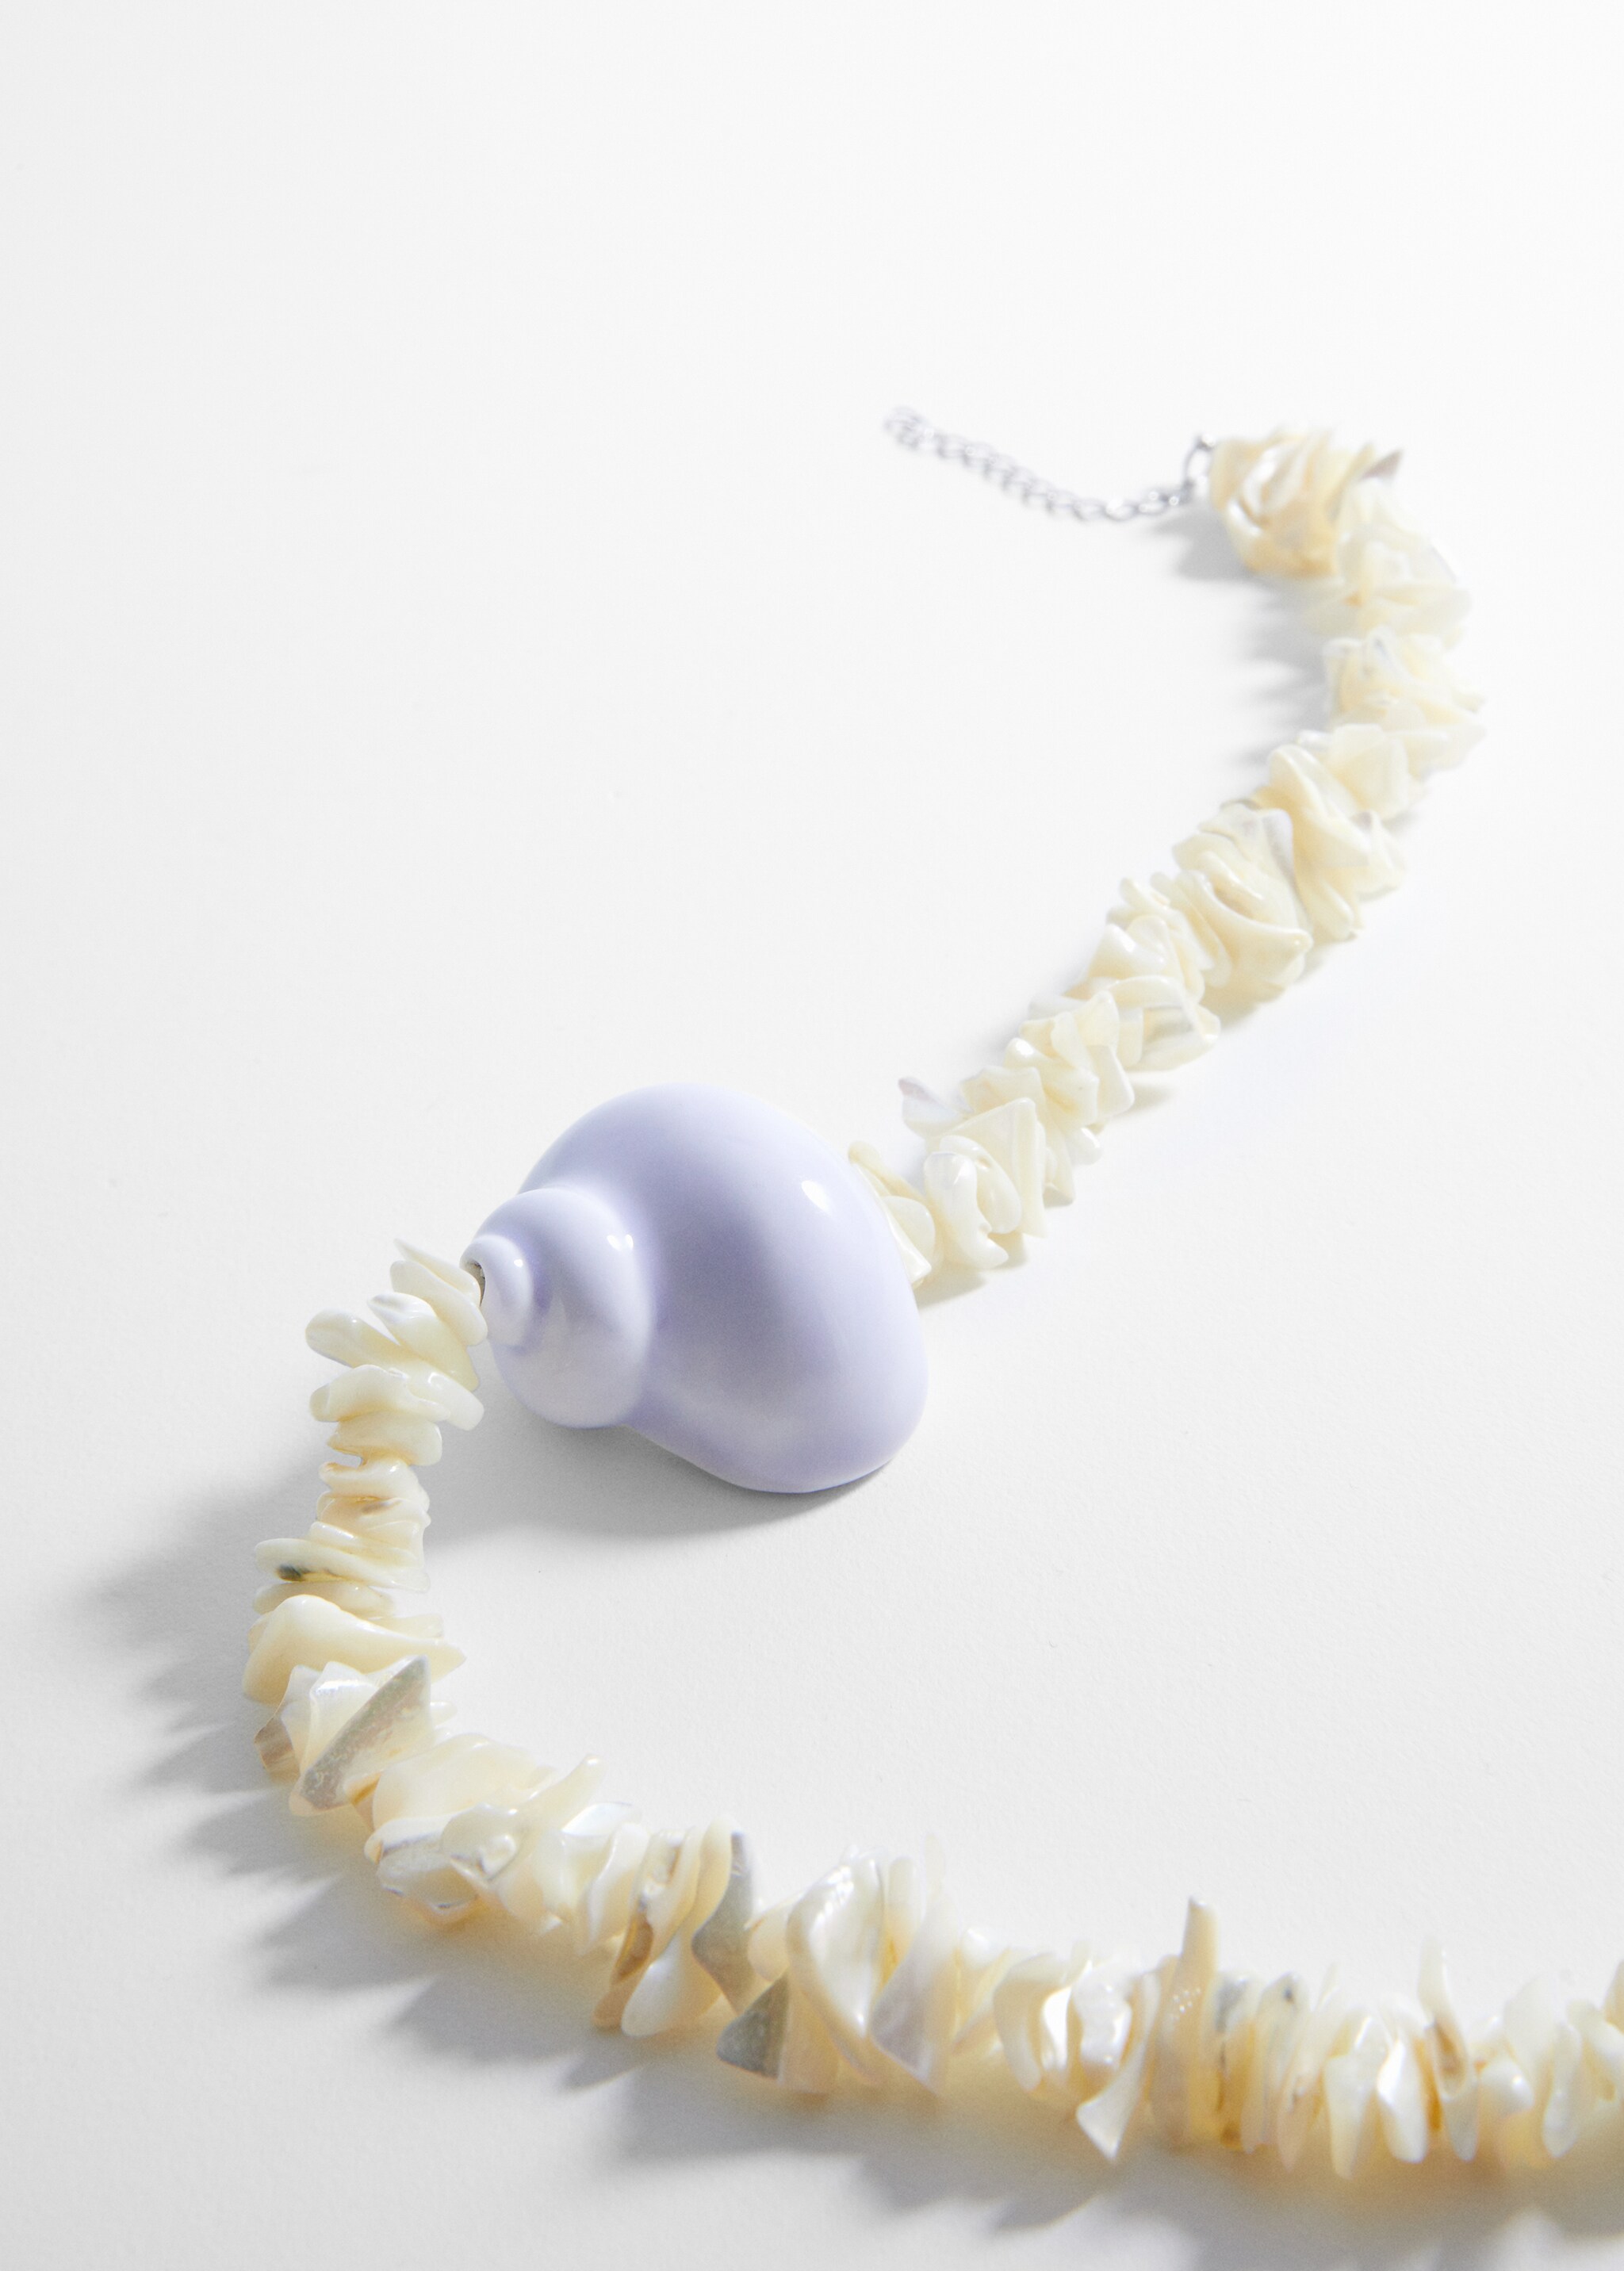 Shell necklace with mother-of-pearl beads - Medium plane